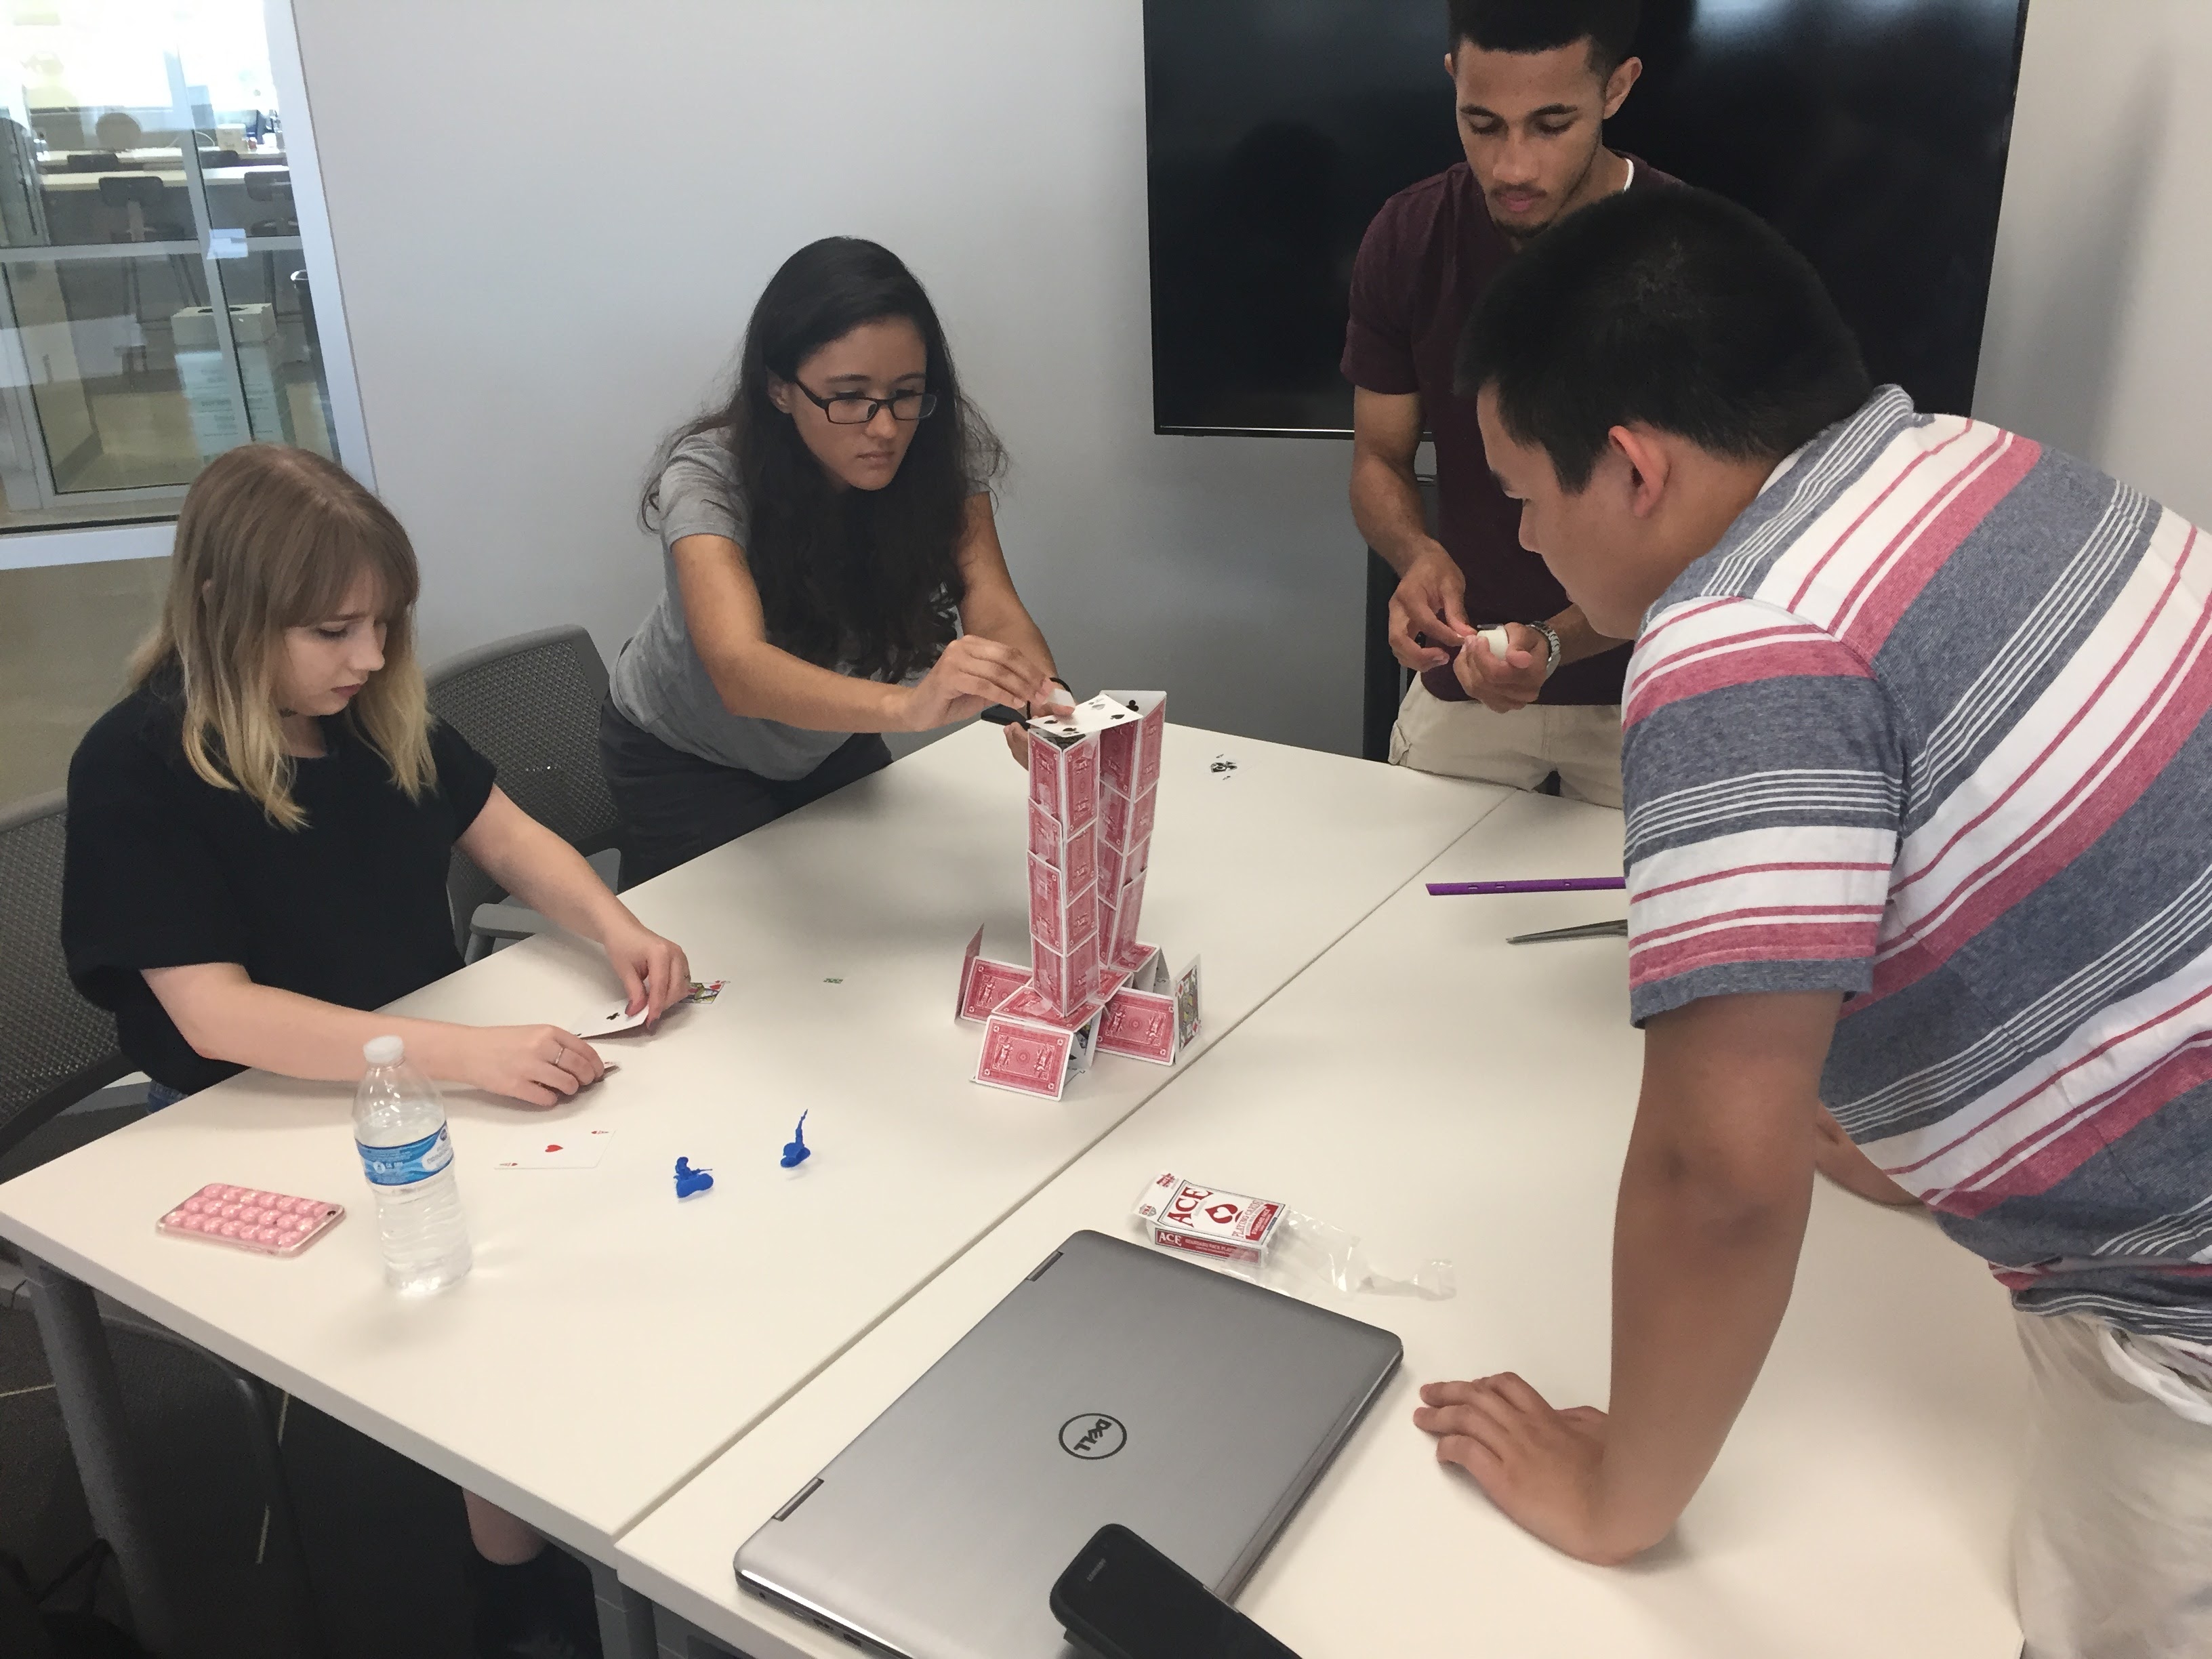 Students building a house of playing cards